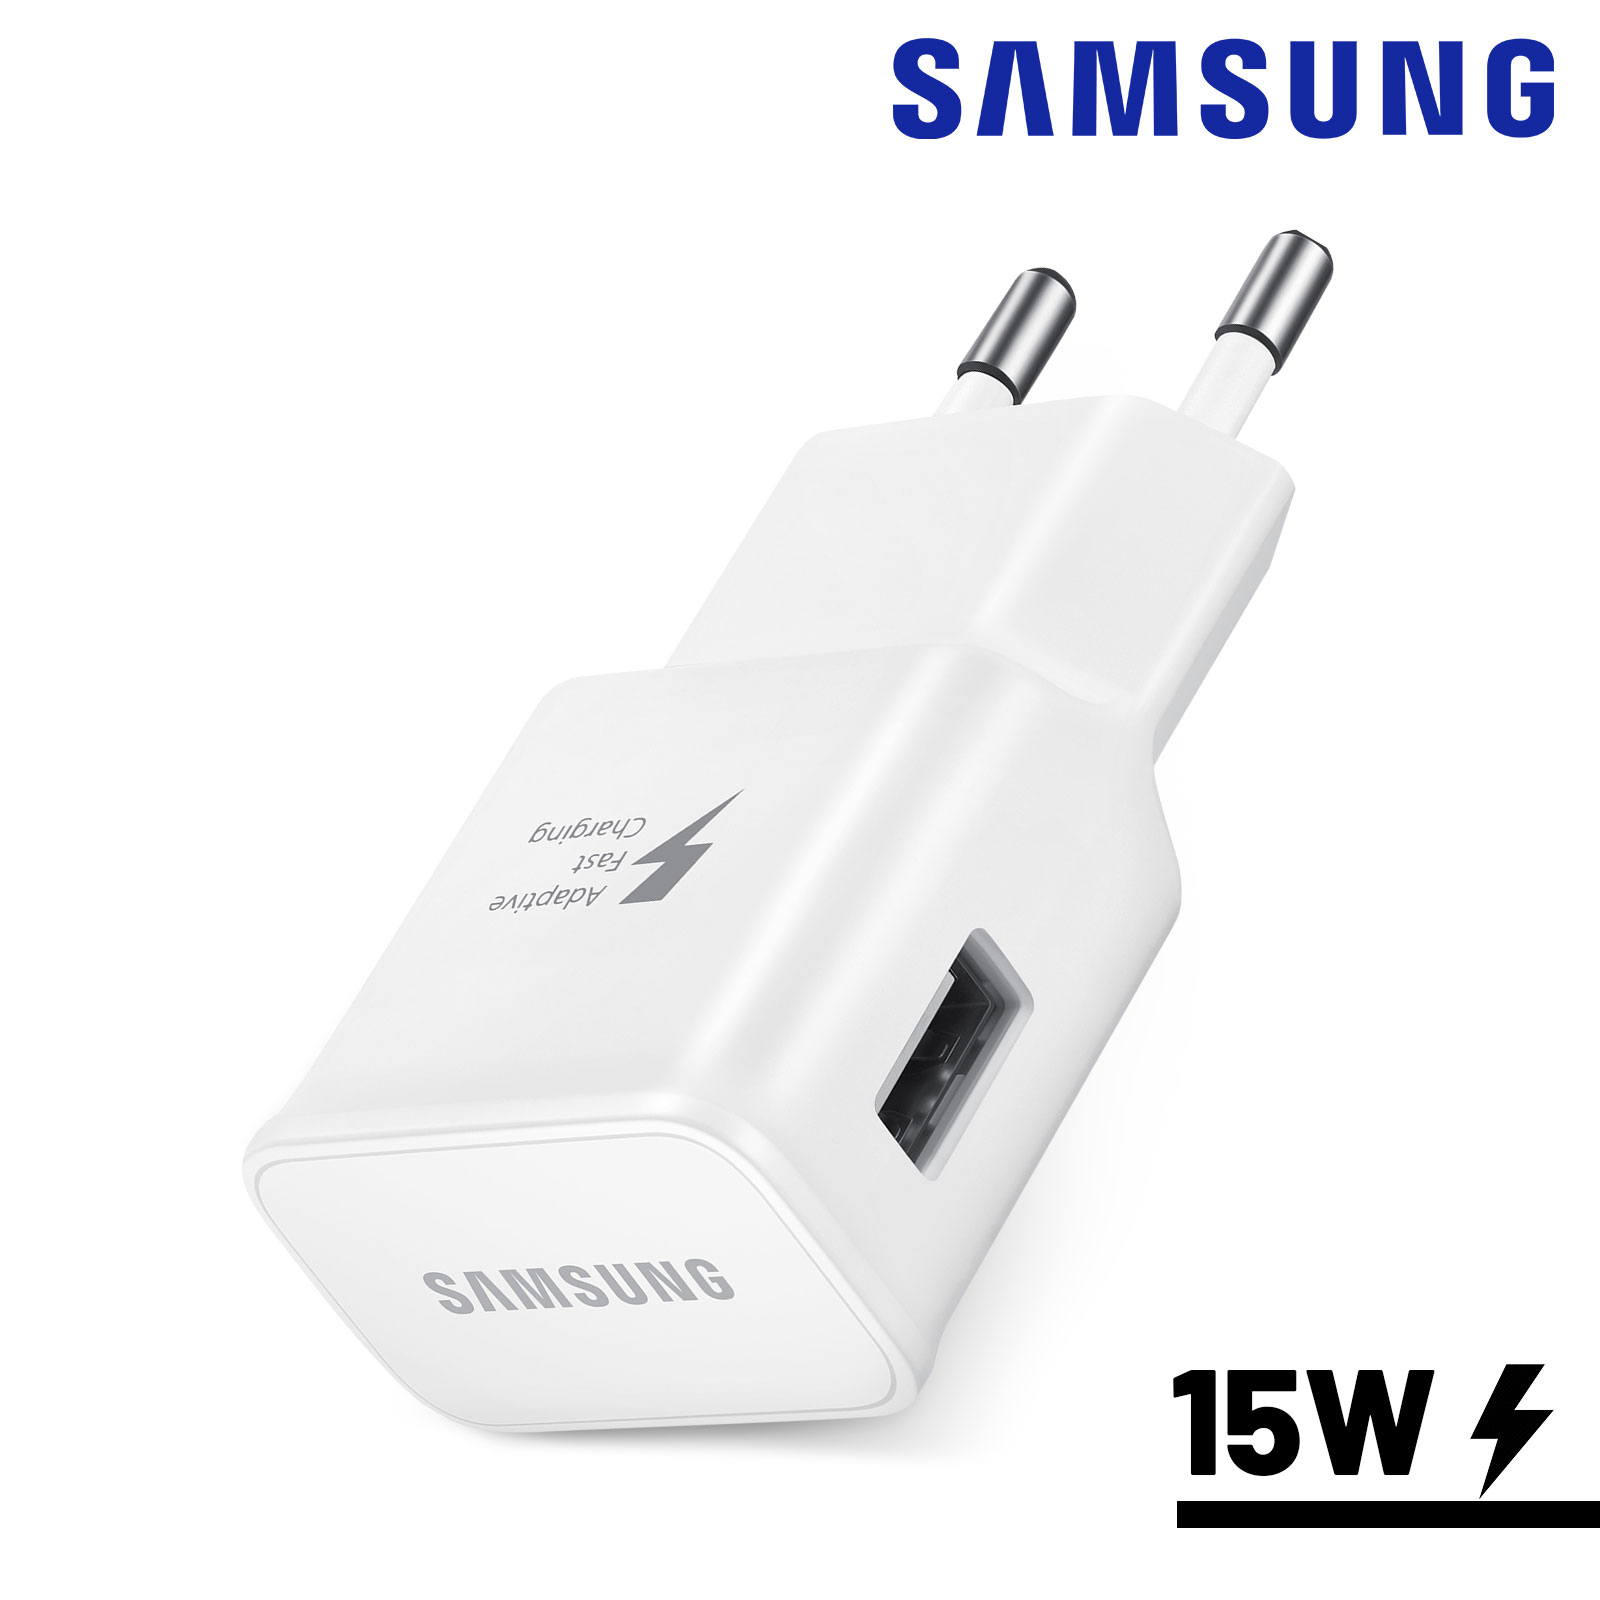 Chargeur Samsung Galaxy A10 - Chargeur Rapide